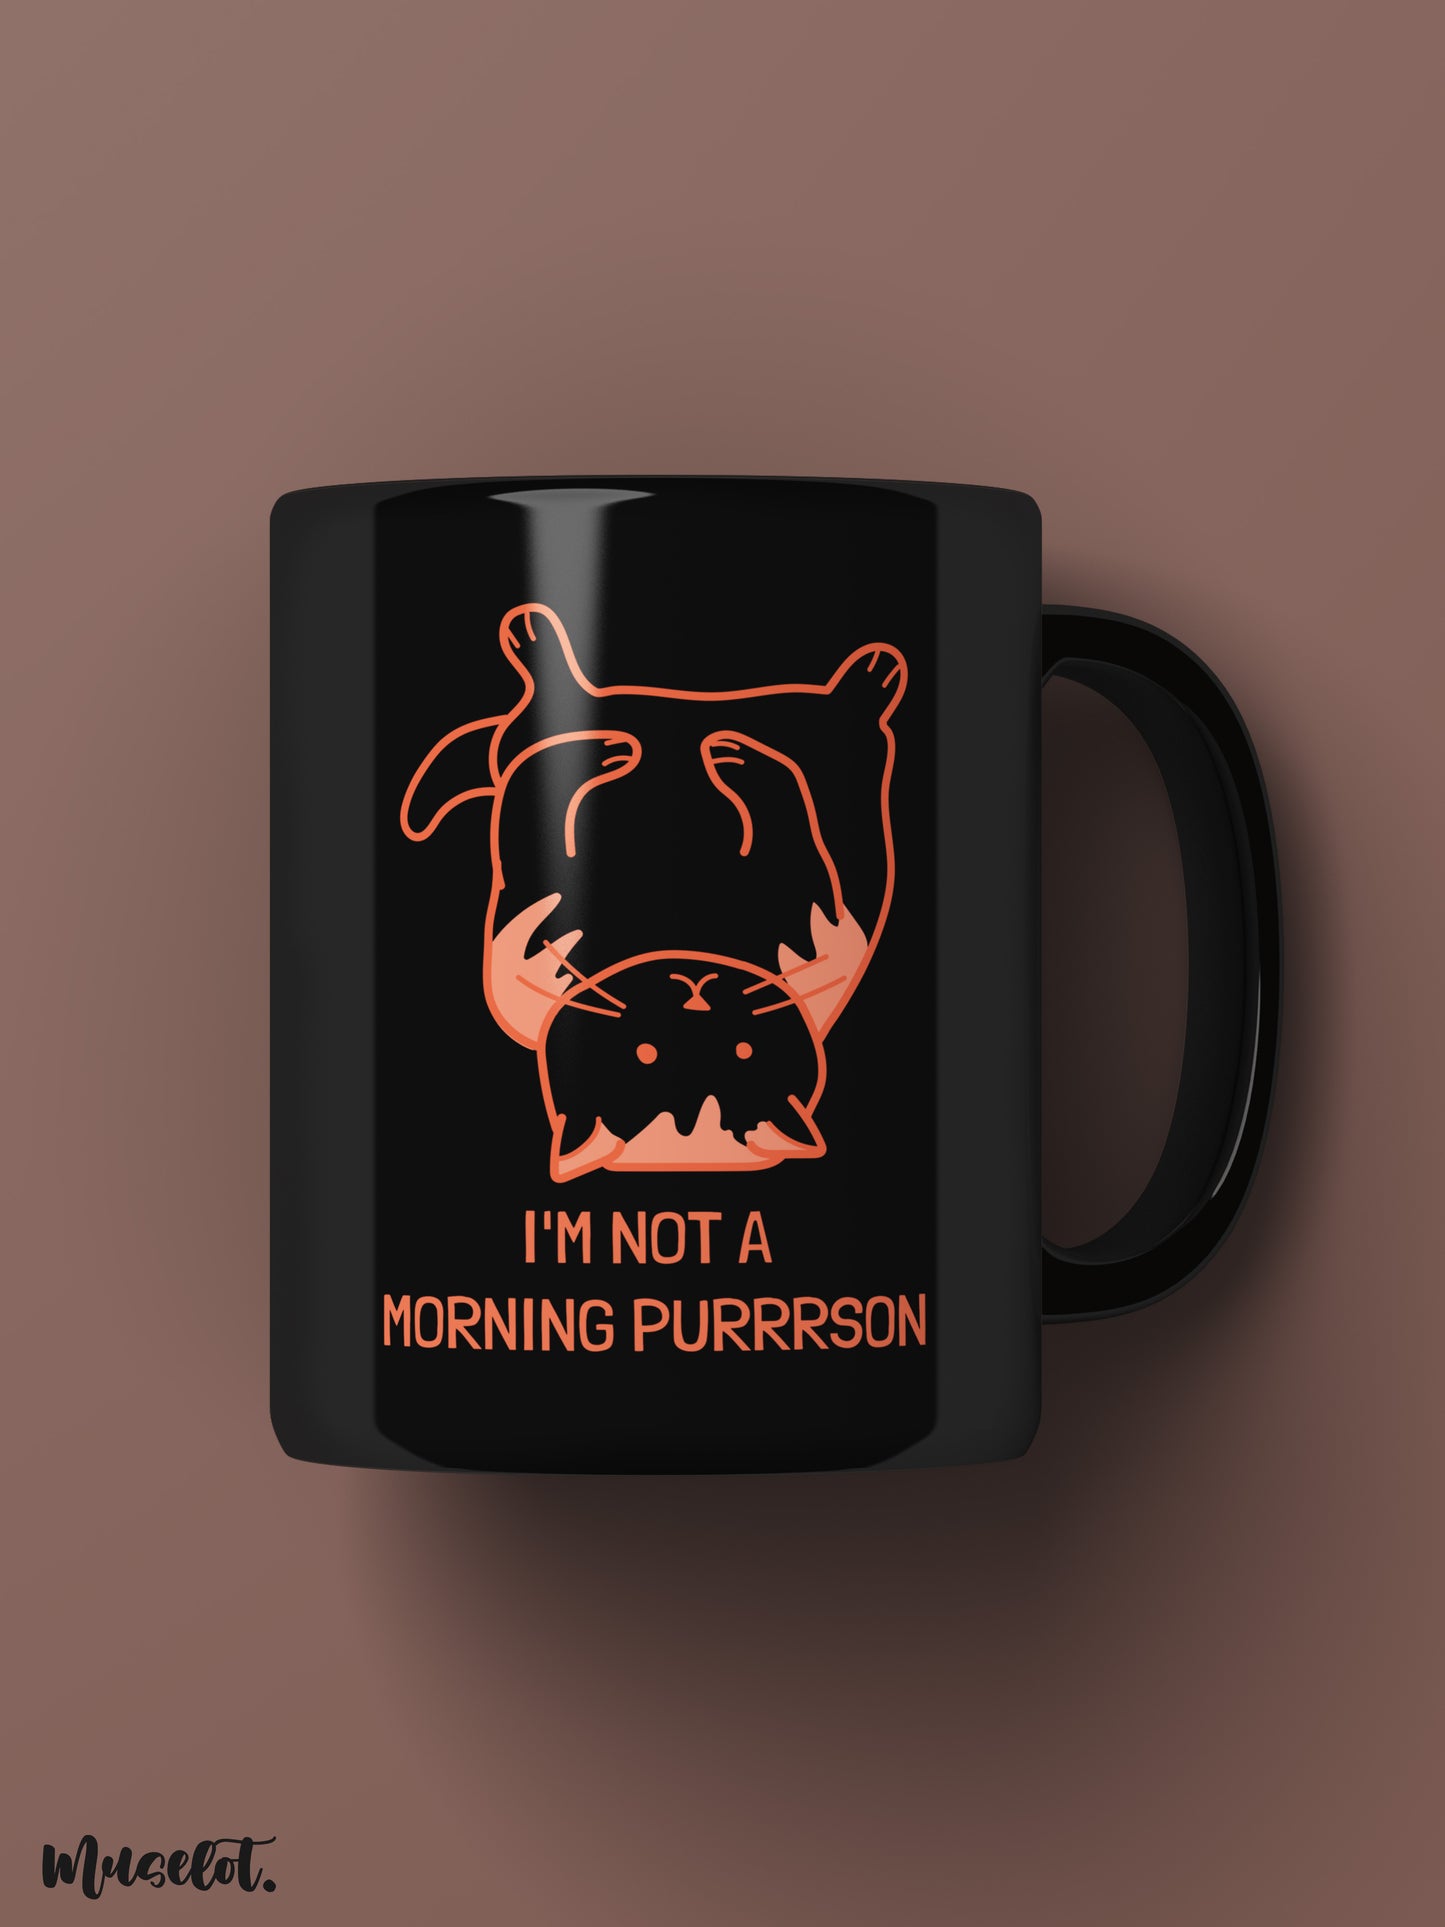 I am not a morning person printed black coffee mugs by Muselot